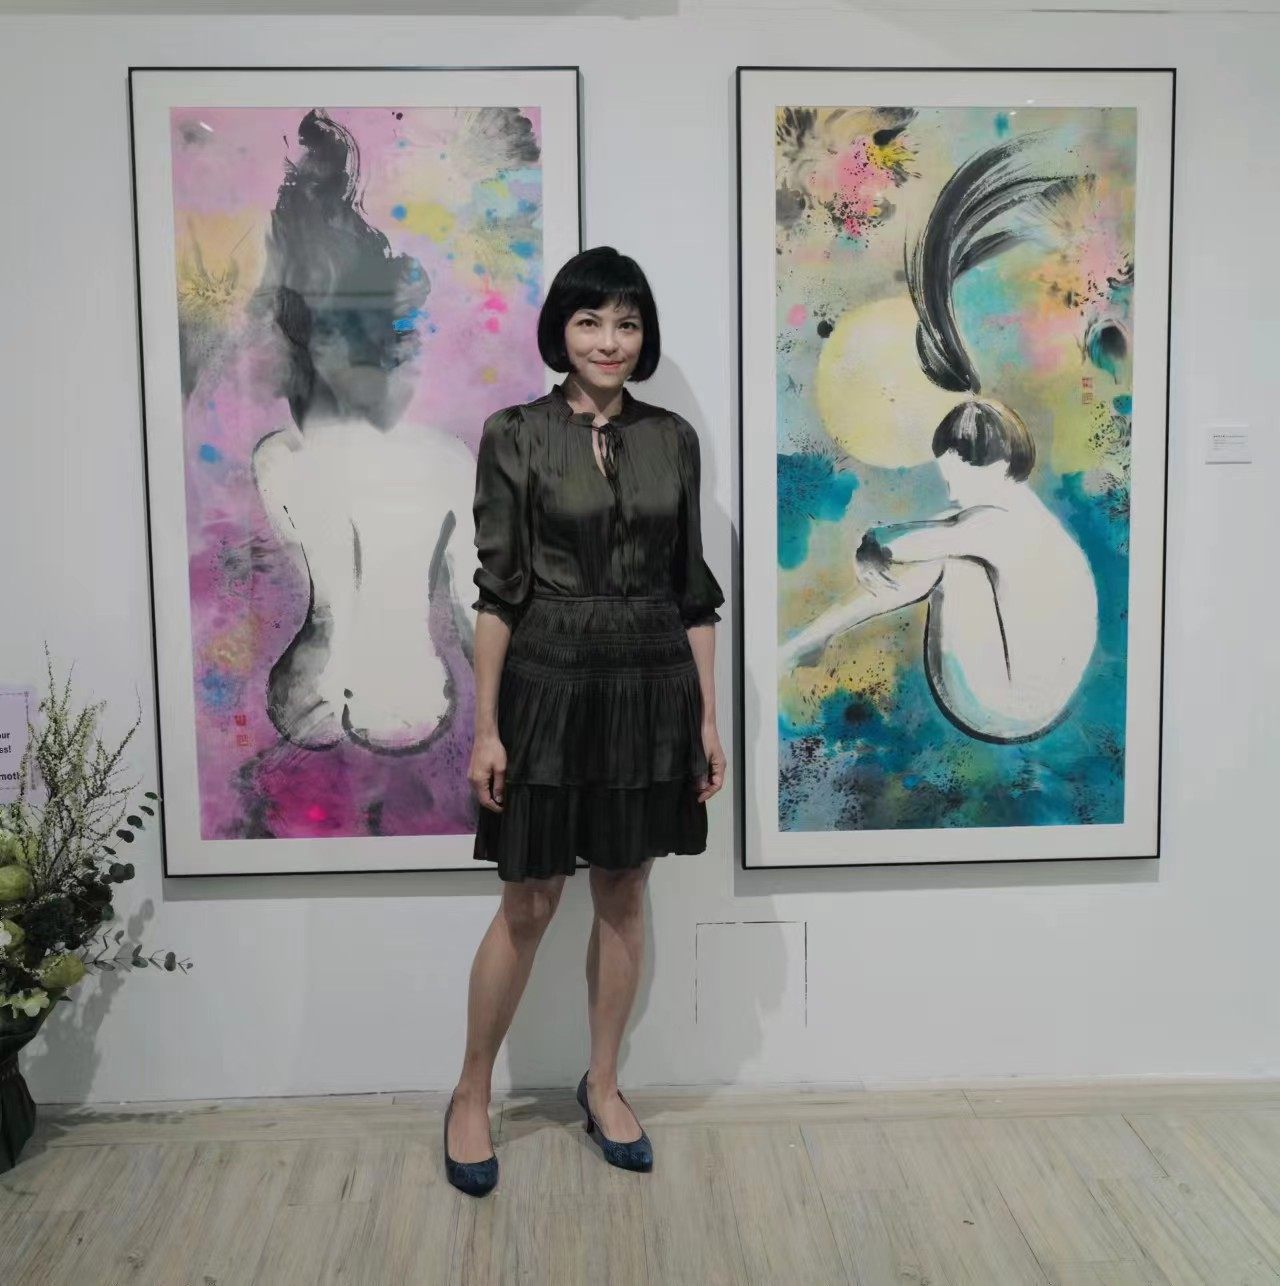 Miranda Yiu with two of her artworks of female nudes, created using the Chinese ink style, at her solo exhibition “Flow color. White”, at Hong Kong’s Yrellag Gallery. Photo: Miranda Yiu